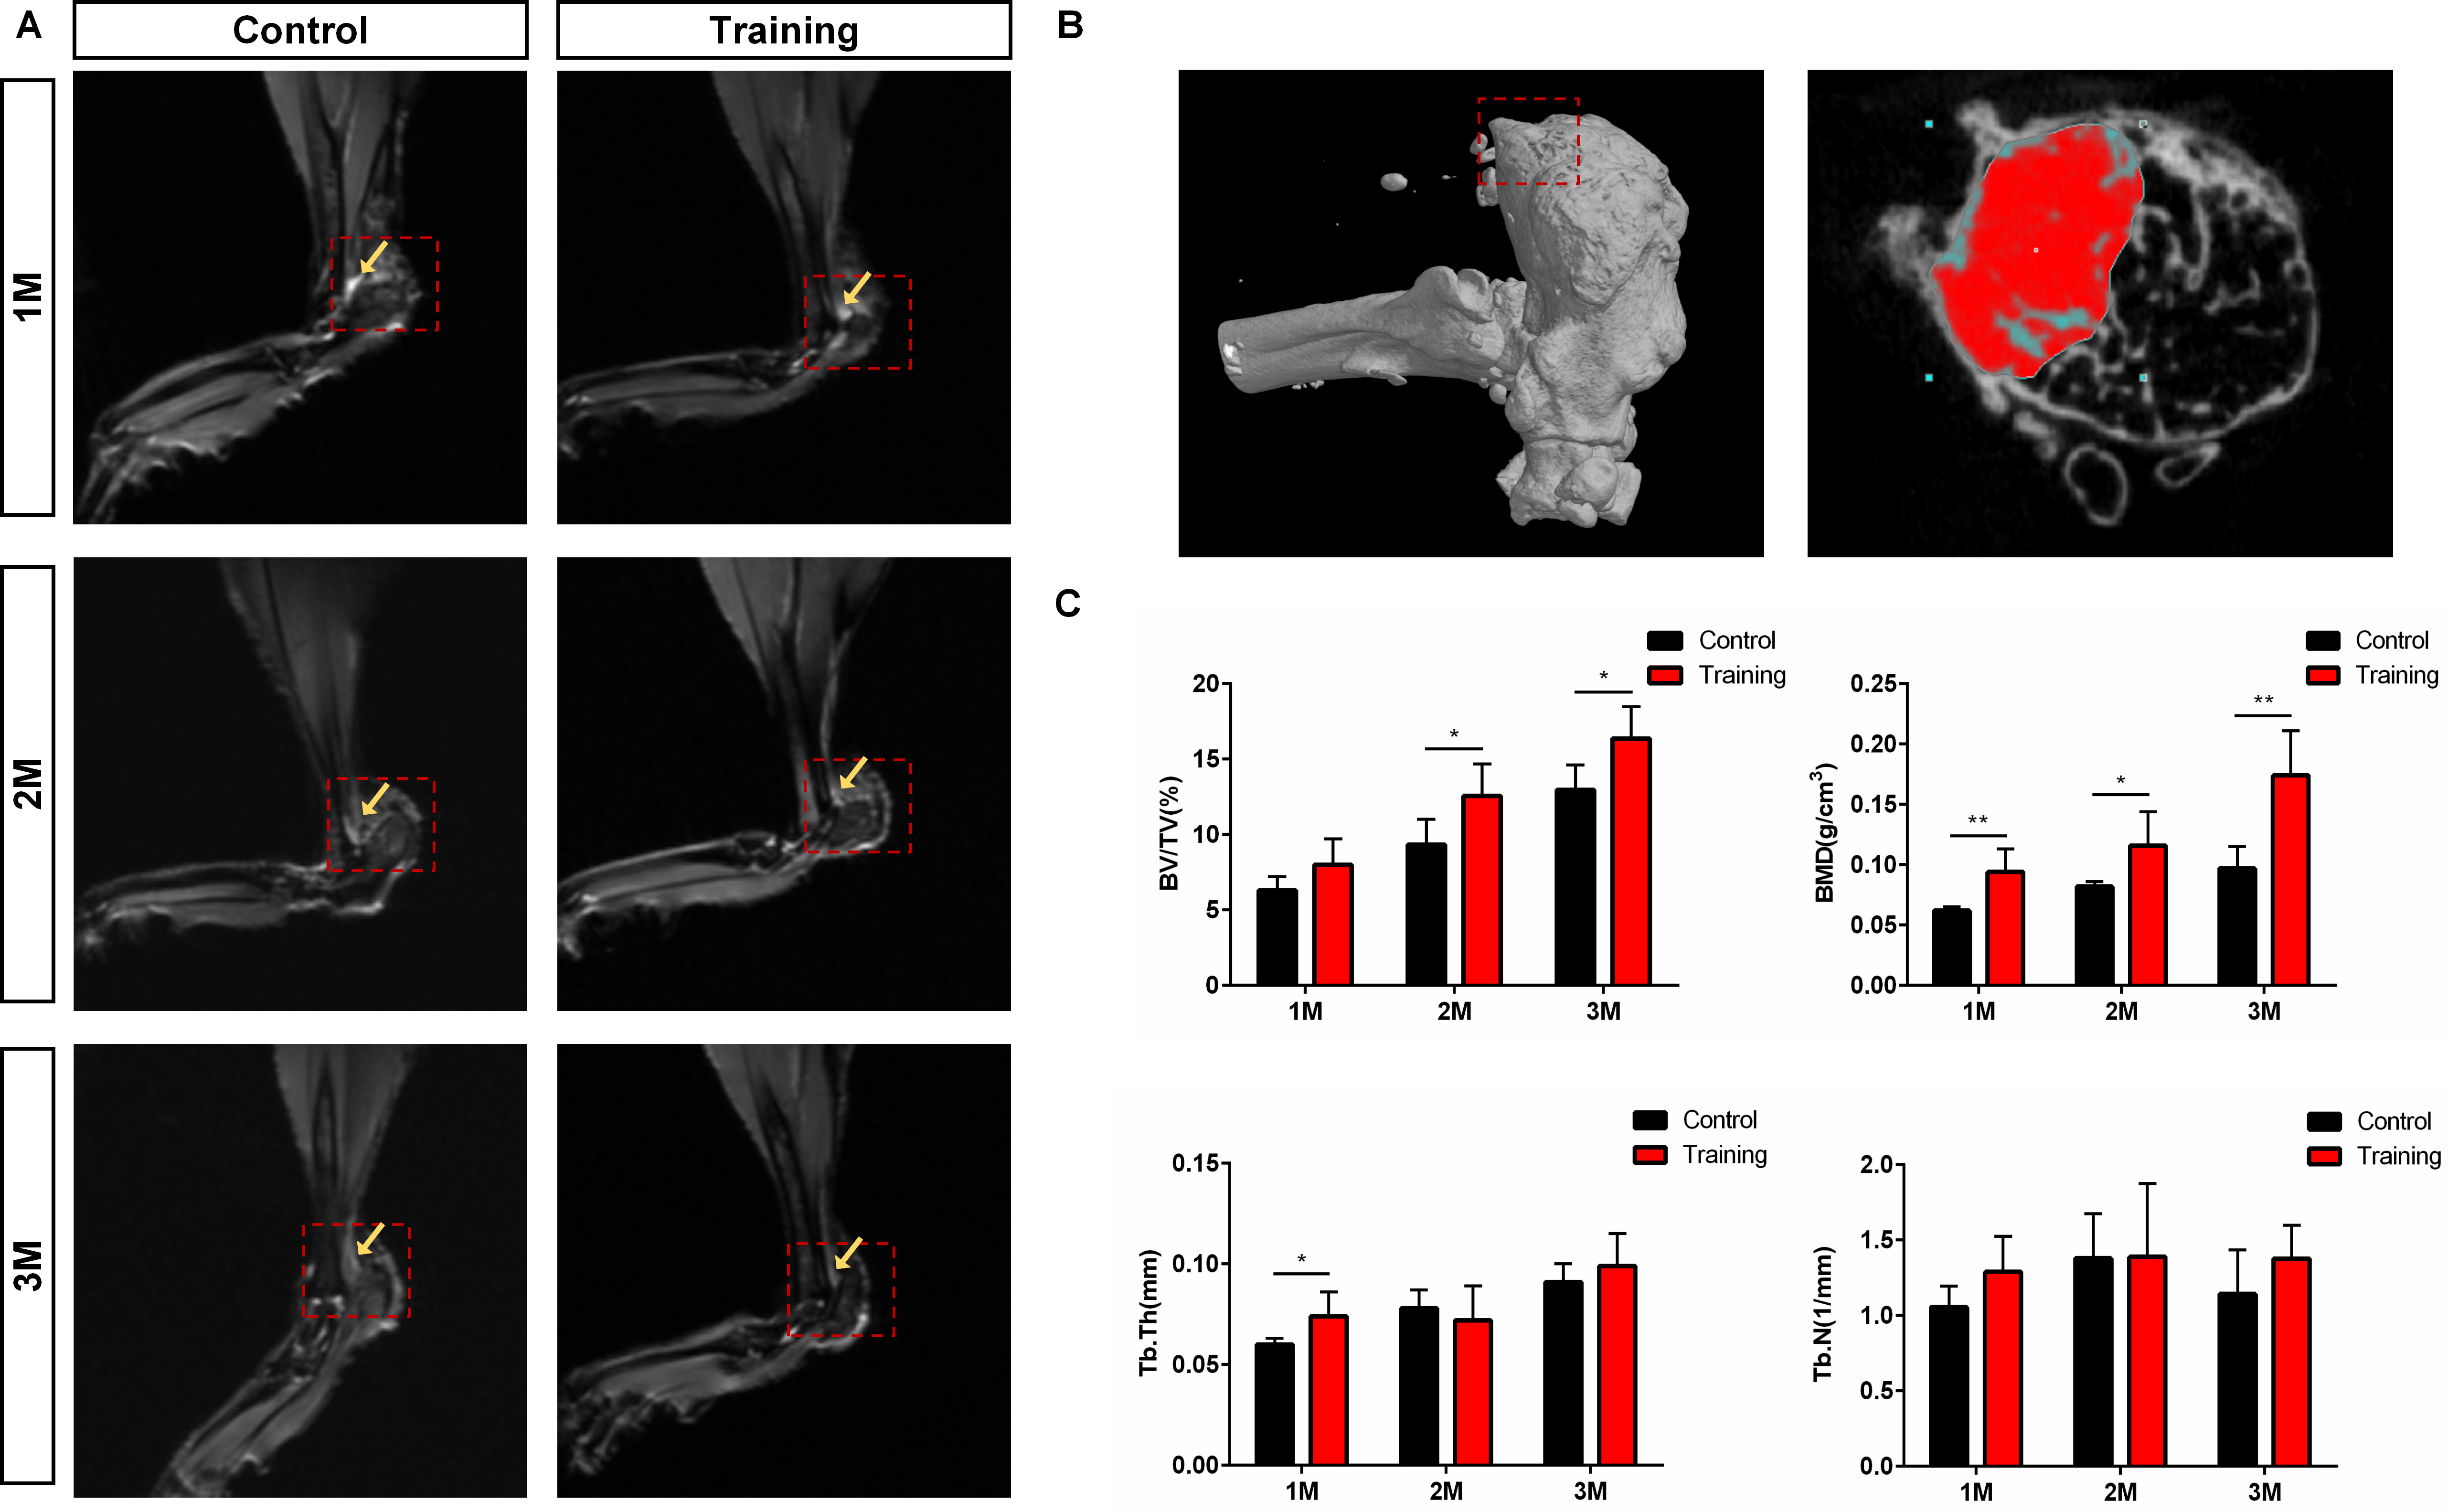 Fig. 5 
            Treadmill training promotes new bone penetration at the tendon-bone insertion and enhances bone density. a) Coronal T2-weighted image showing tendon-bone insertion; the red box indicates the tendon-bone insertion, and the yellow arrow shows the high signal area. b) The red box indicates the Achilles tendon insertion (footprint area) on the left image, and region of interest (the red area on the right image) in microCT analysis. c) The mean bone volume/total volume (BV/TV), trabecular bone thickness (Tb.Th), trabecular bone number (Tb.N), and bone mineral density (BMD) value of each group were measured. N = 5 for all groups. *p < 0.05, **p < 0.01 compared with the control groups.
          